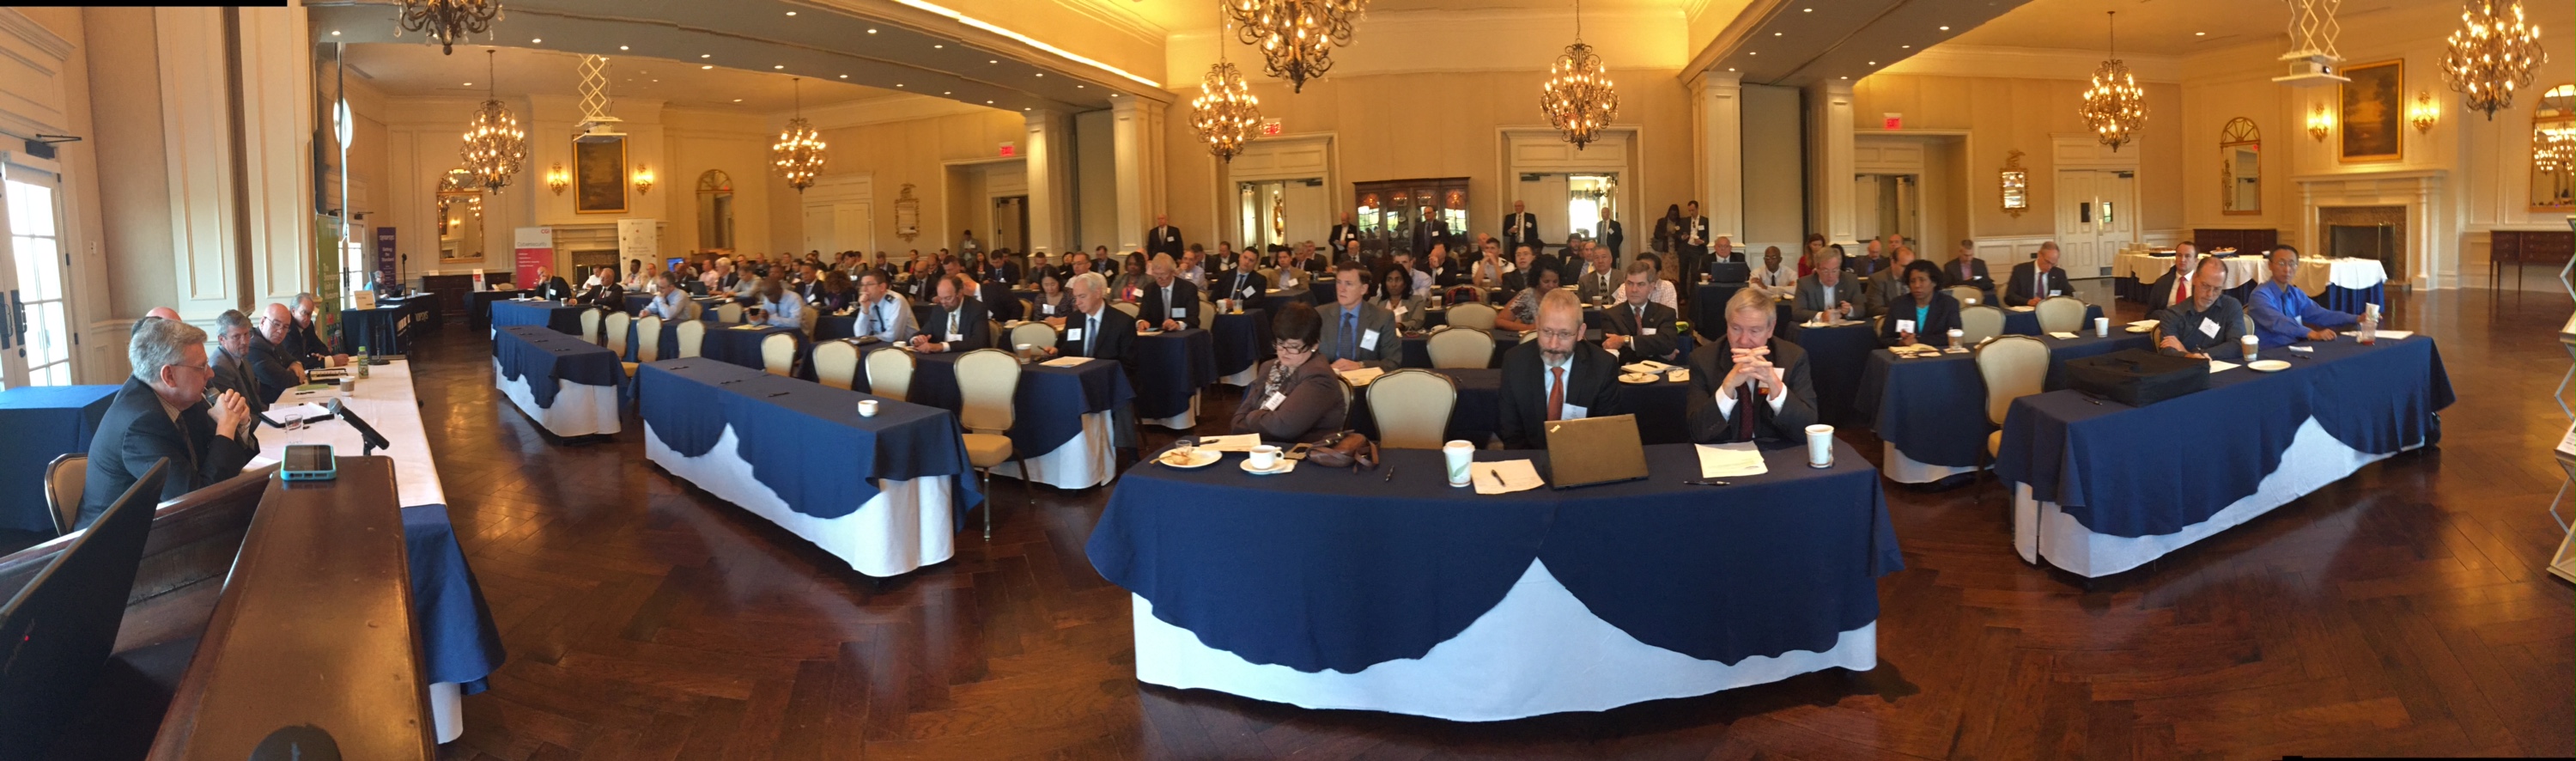 CISQ-Cyber-Resilience-Summit-Panorama-Inside-Army-Navy-Country-Club